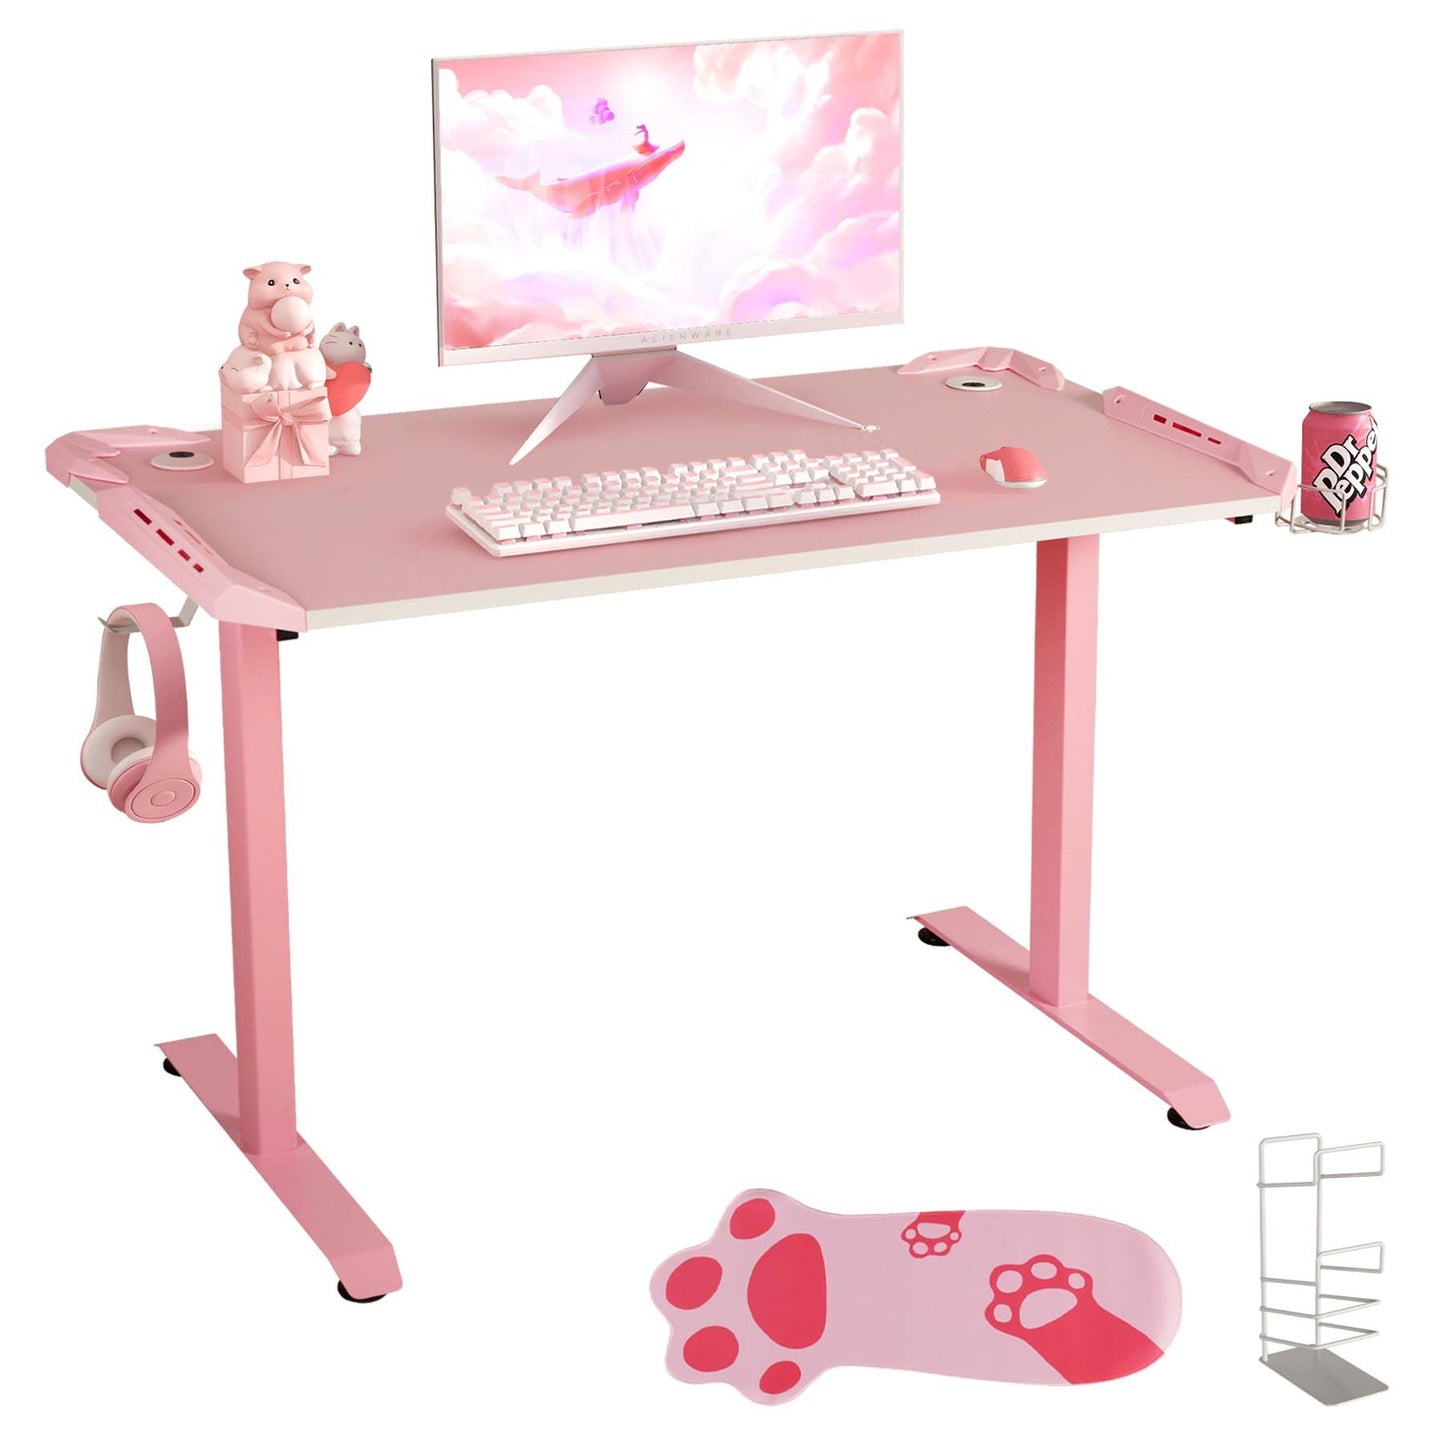 44 Inch T Shaped Gaming Desk Pink Pc Computer Gaming Table Standing Home Office Desk With Mouse Pad & Game Handle Rack